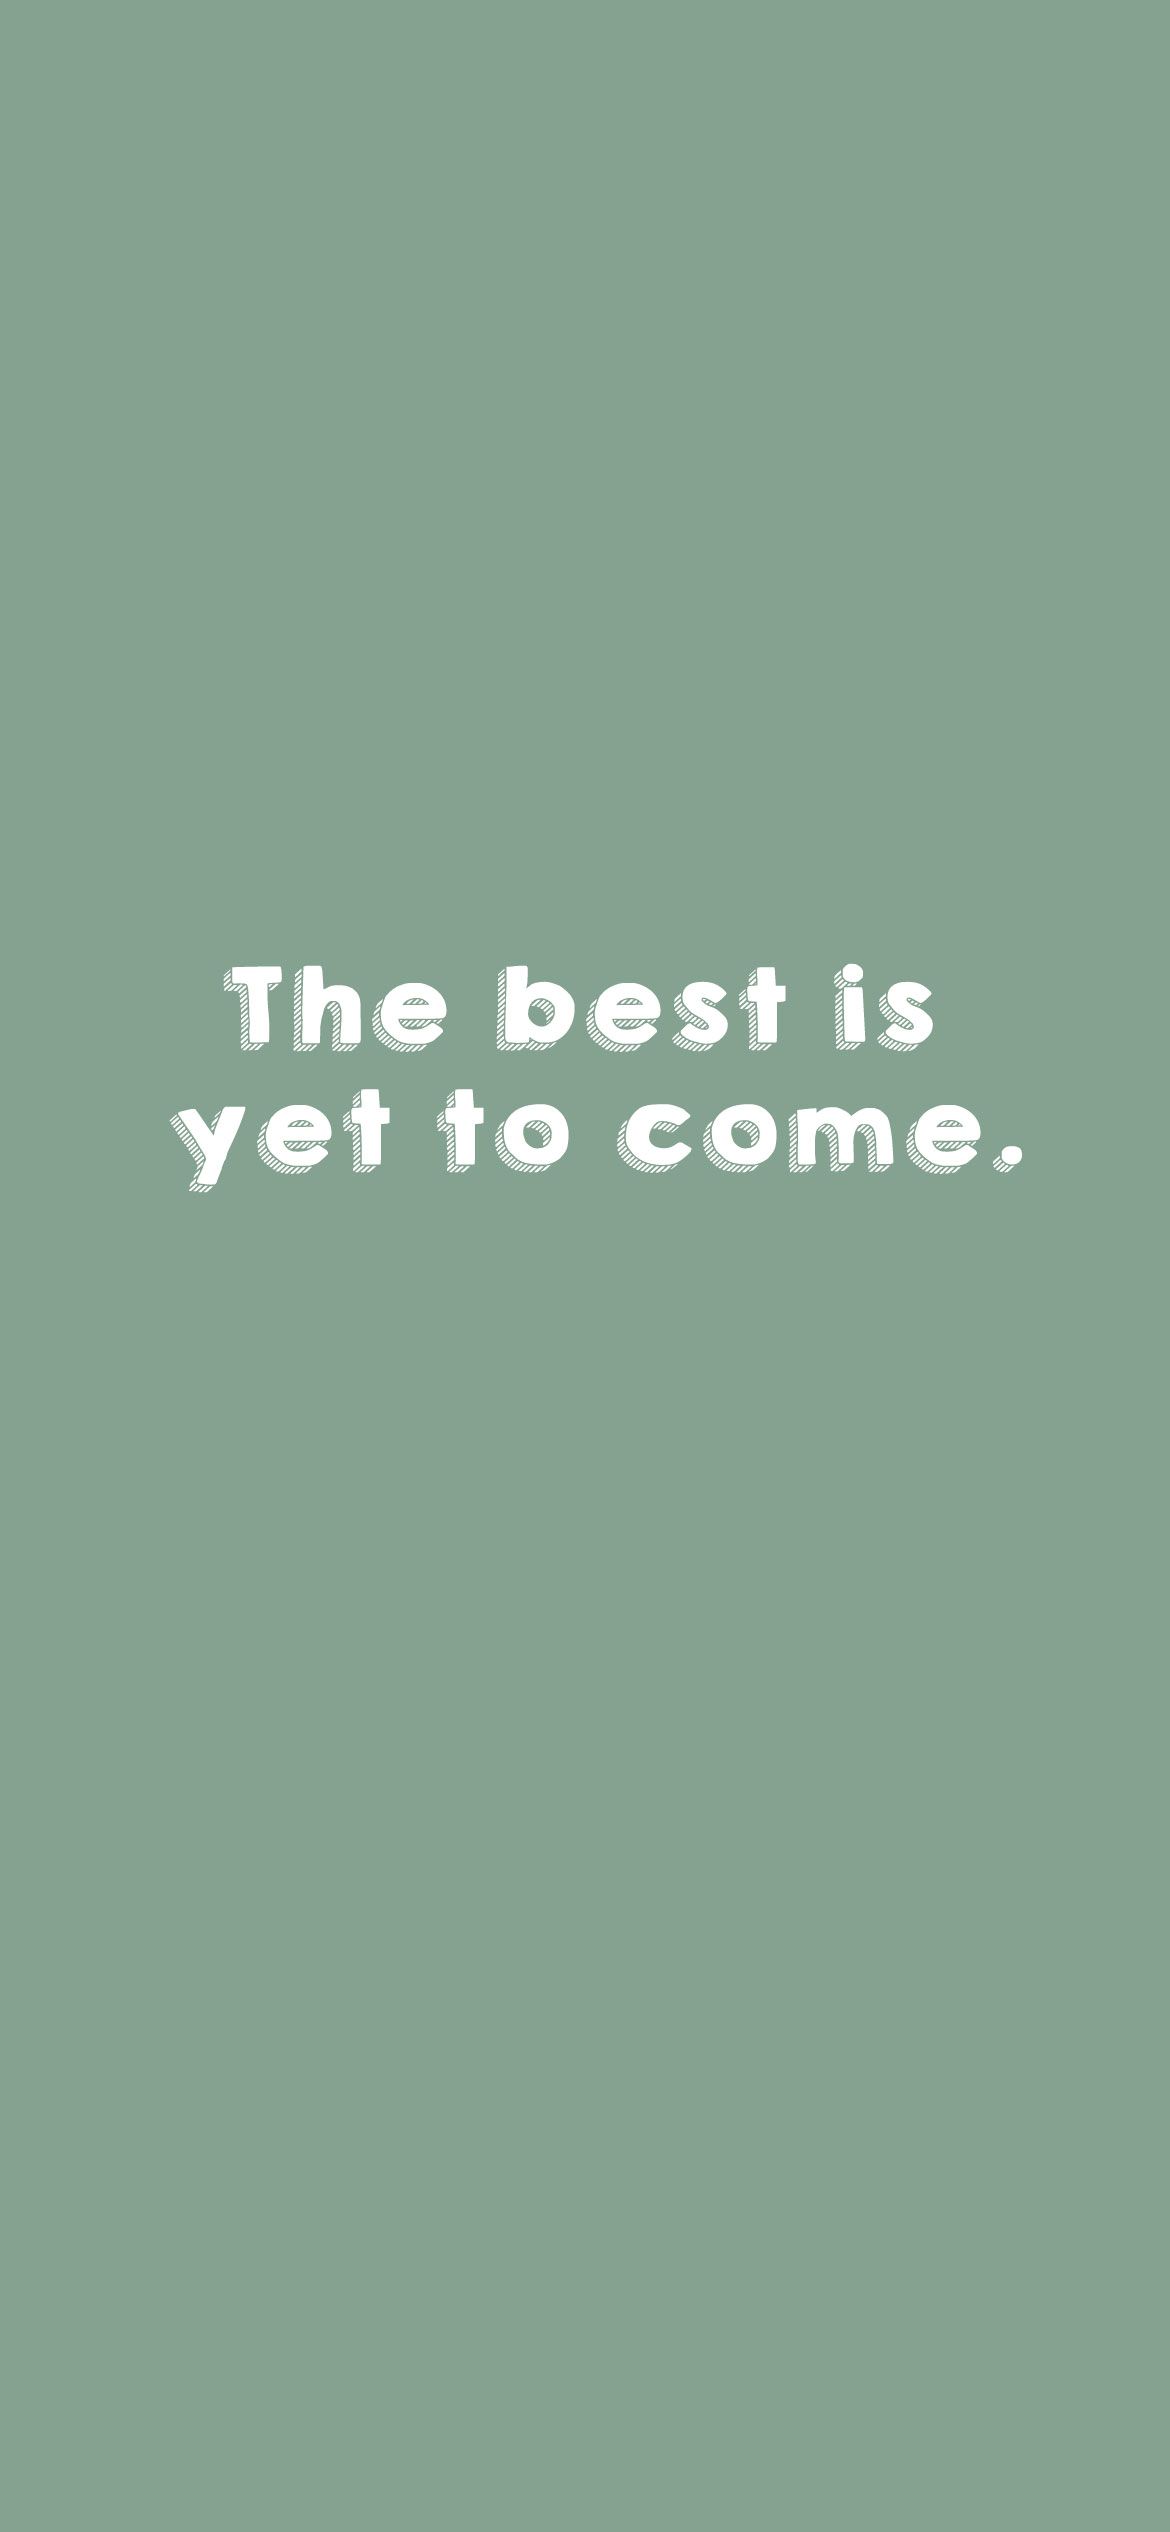 The best is yet to come. - Sage green